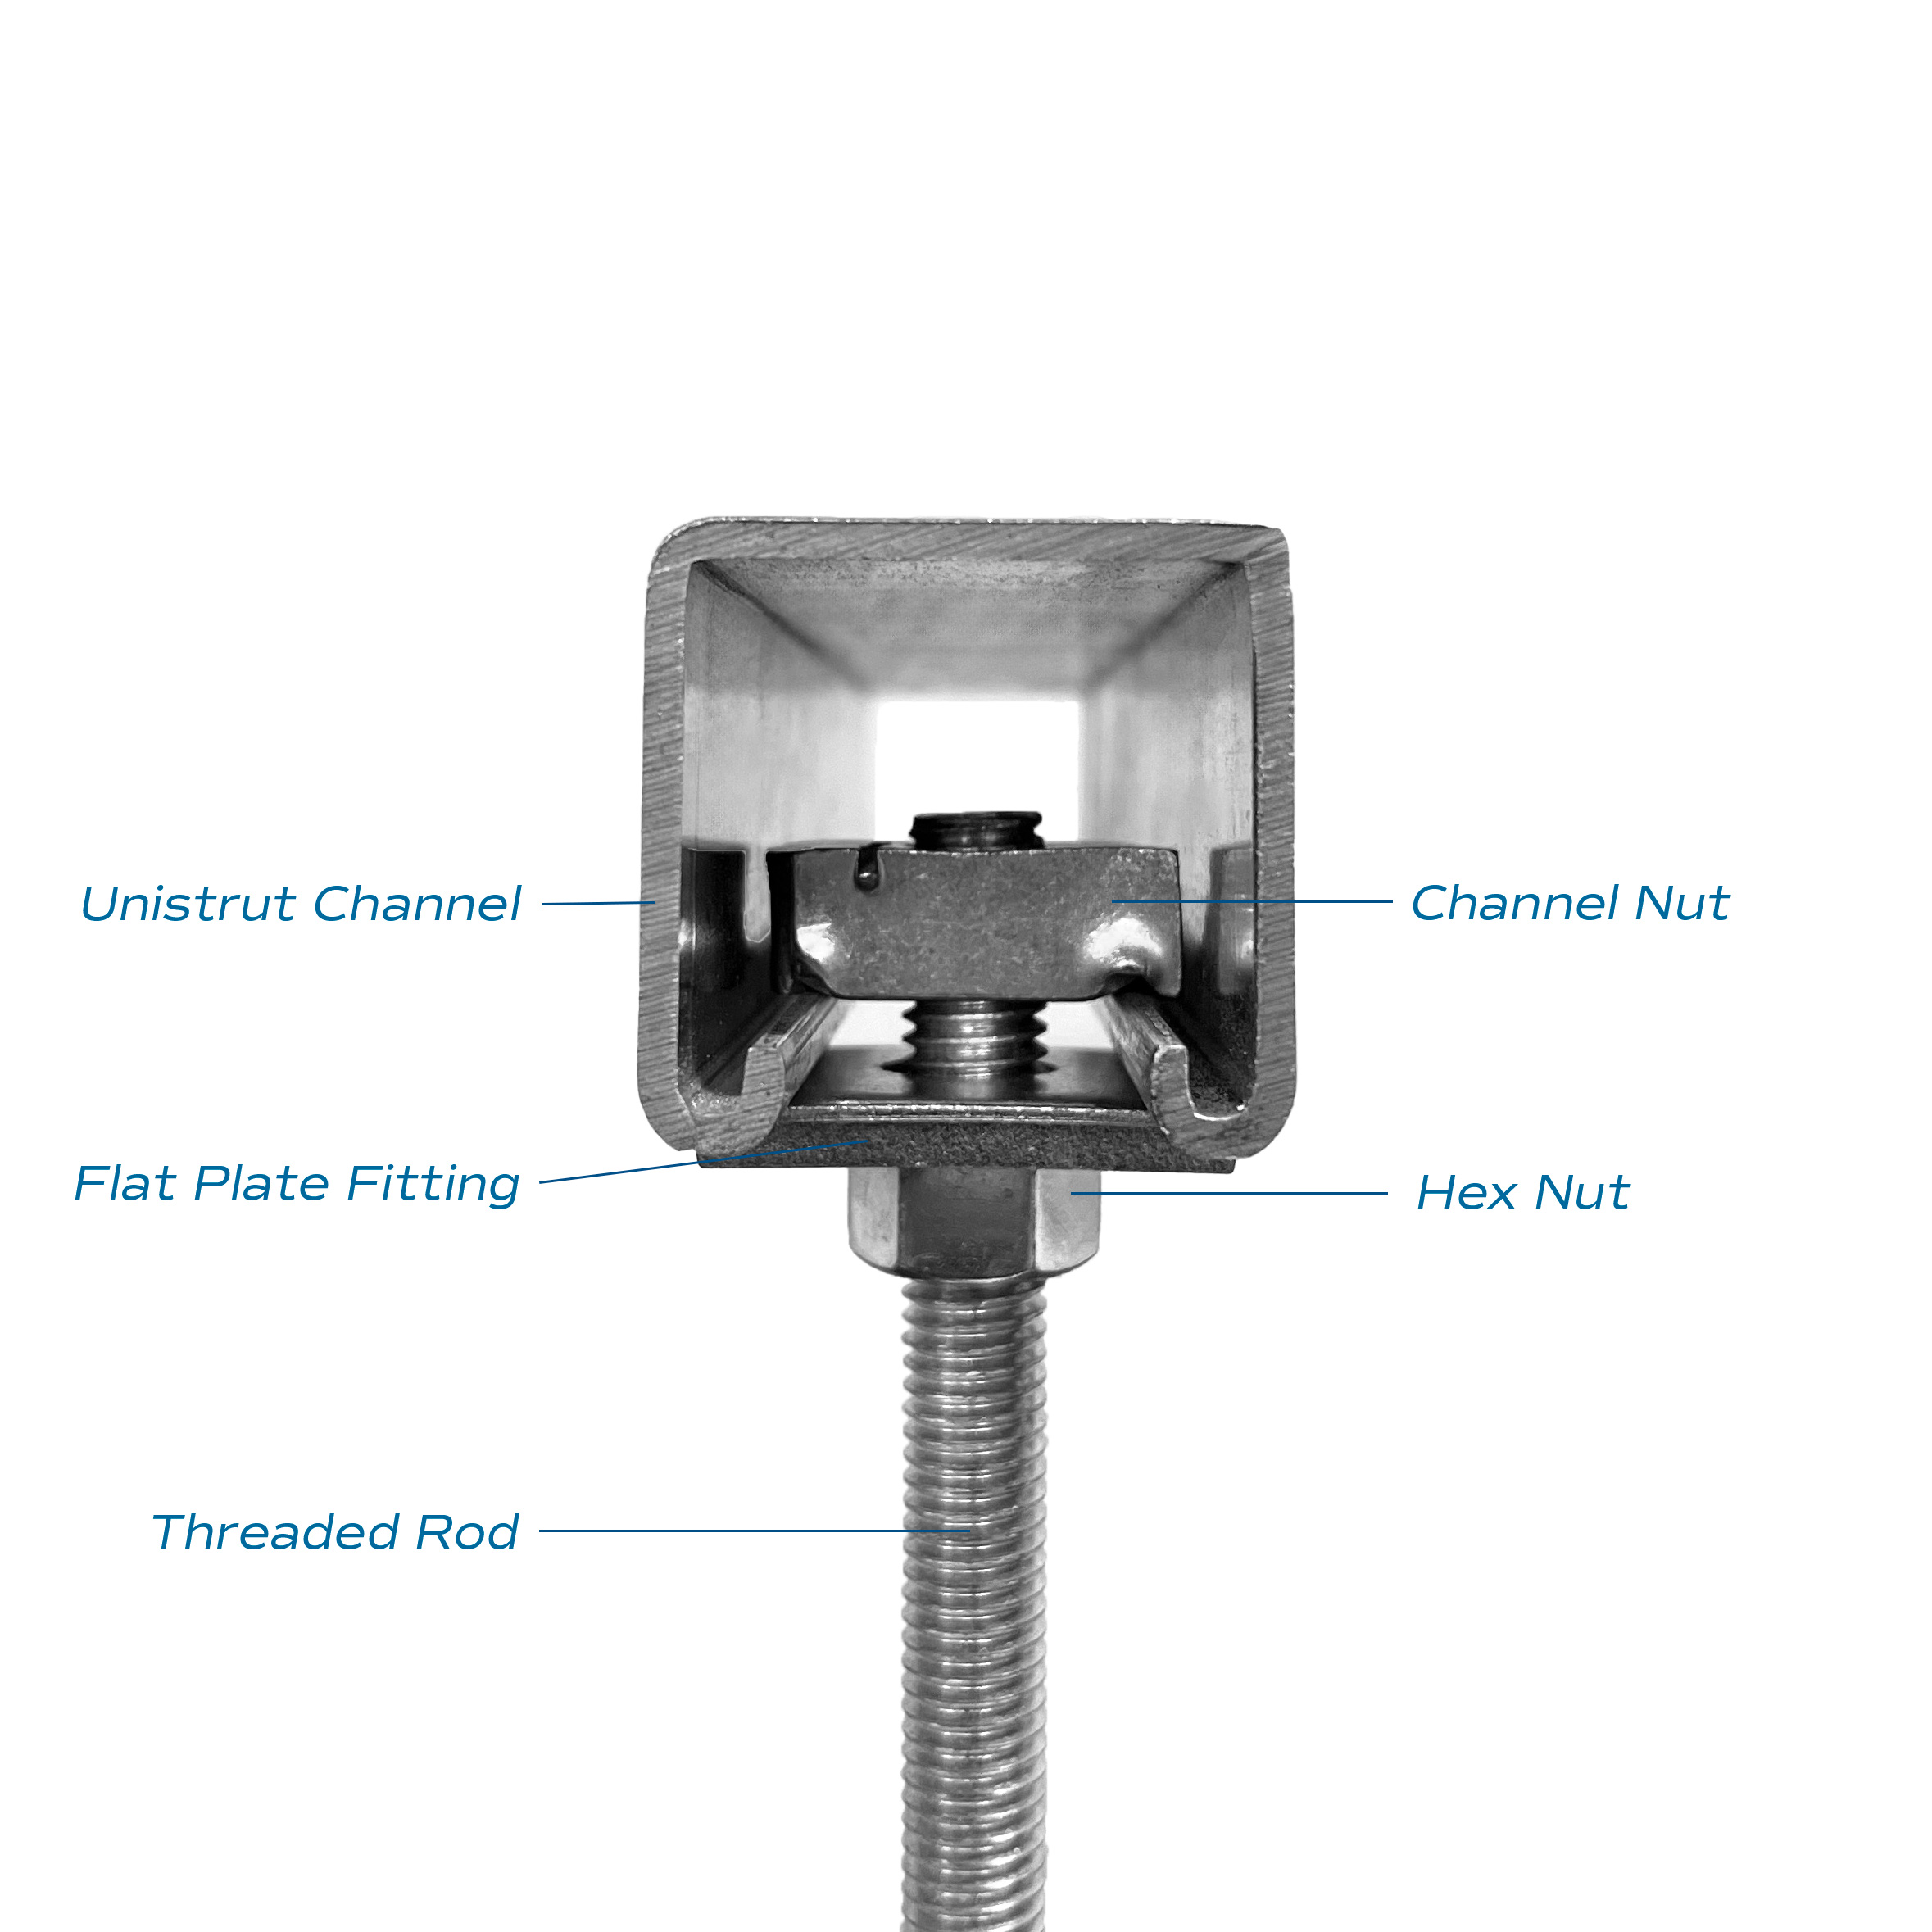 How to Connect Unistrut to Threaded Rod - Unistrut Midwest